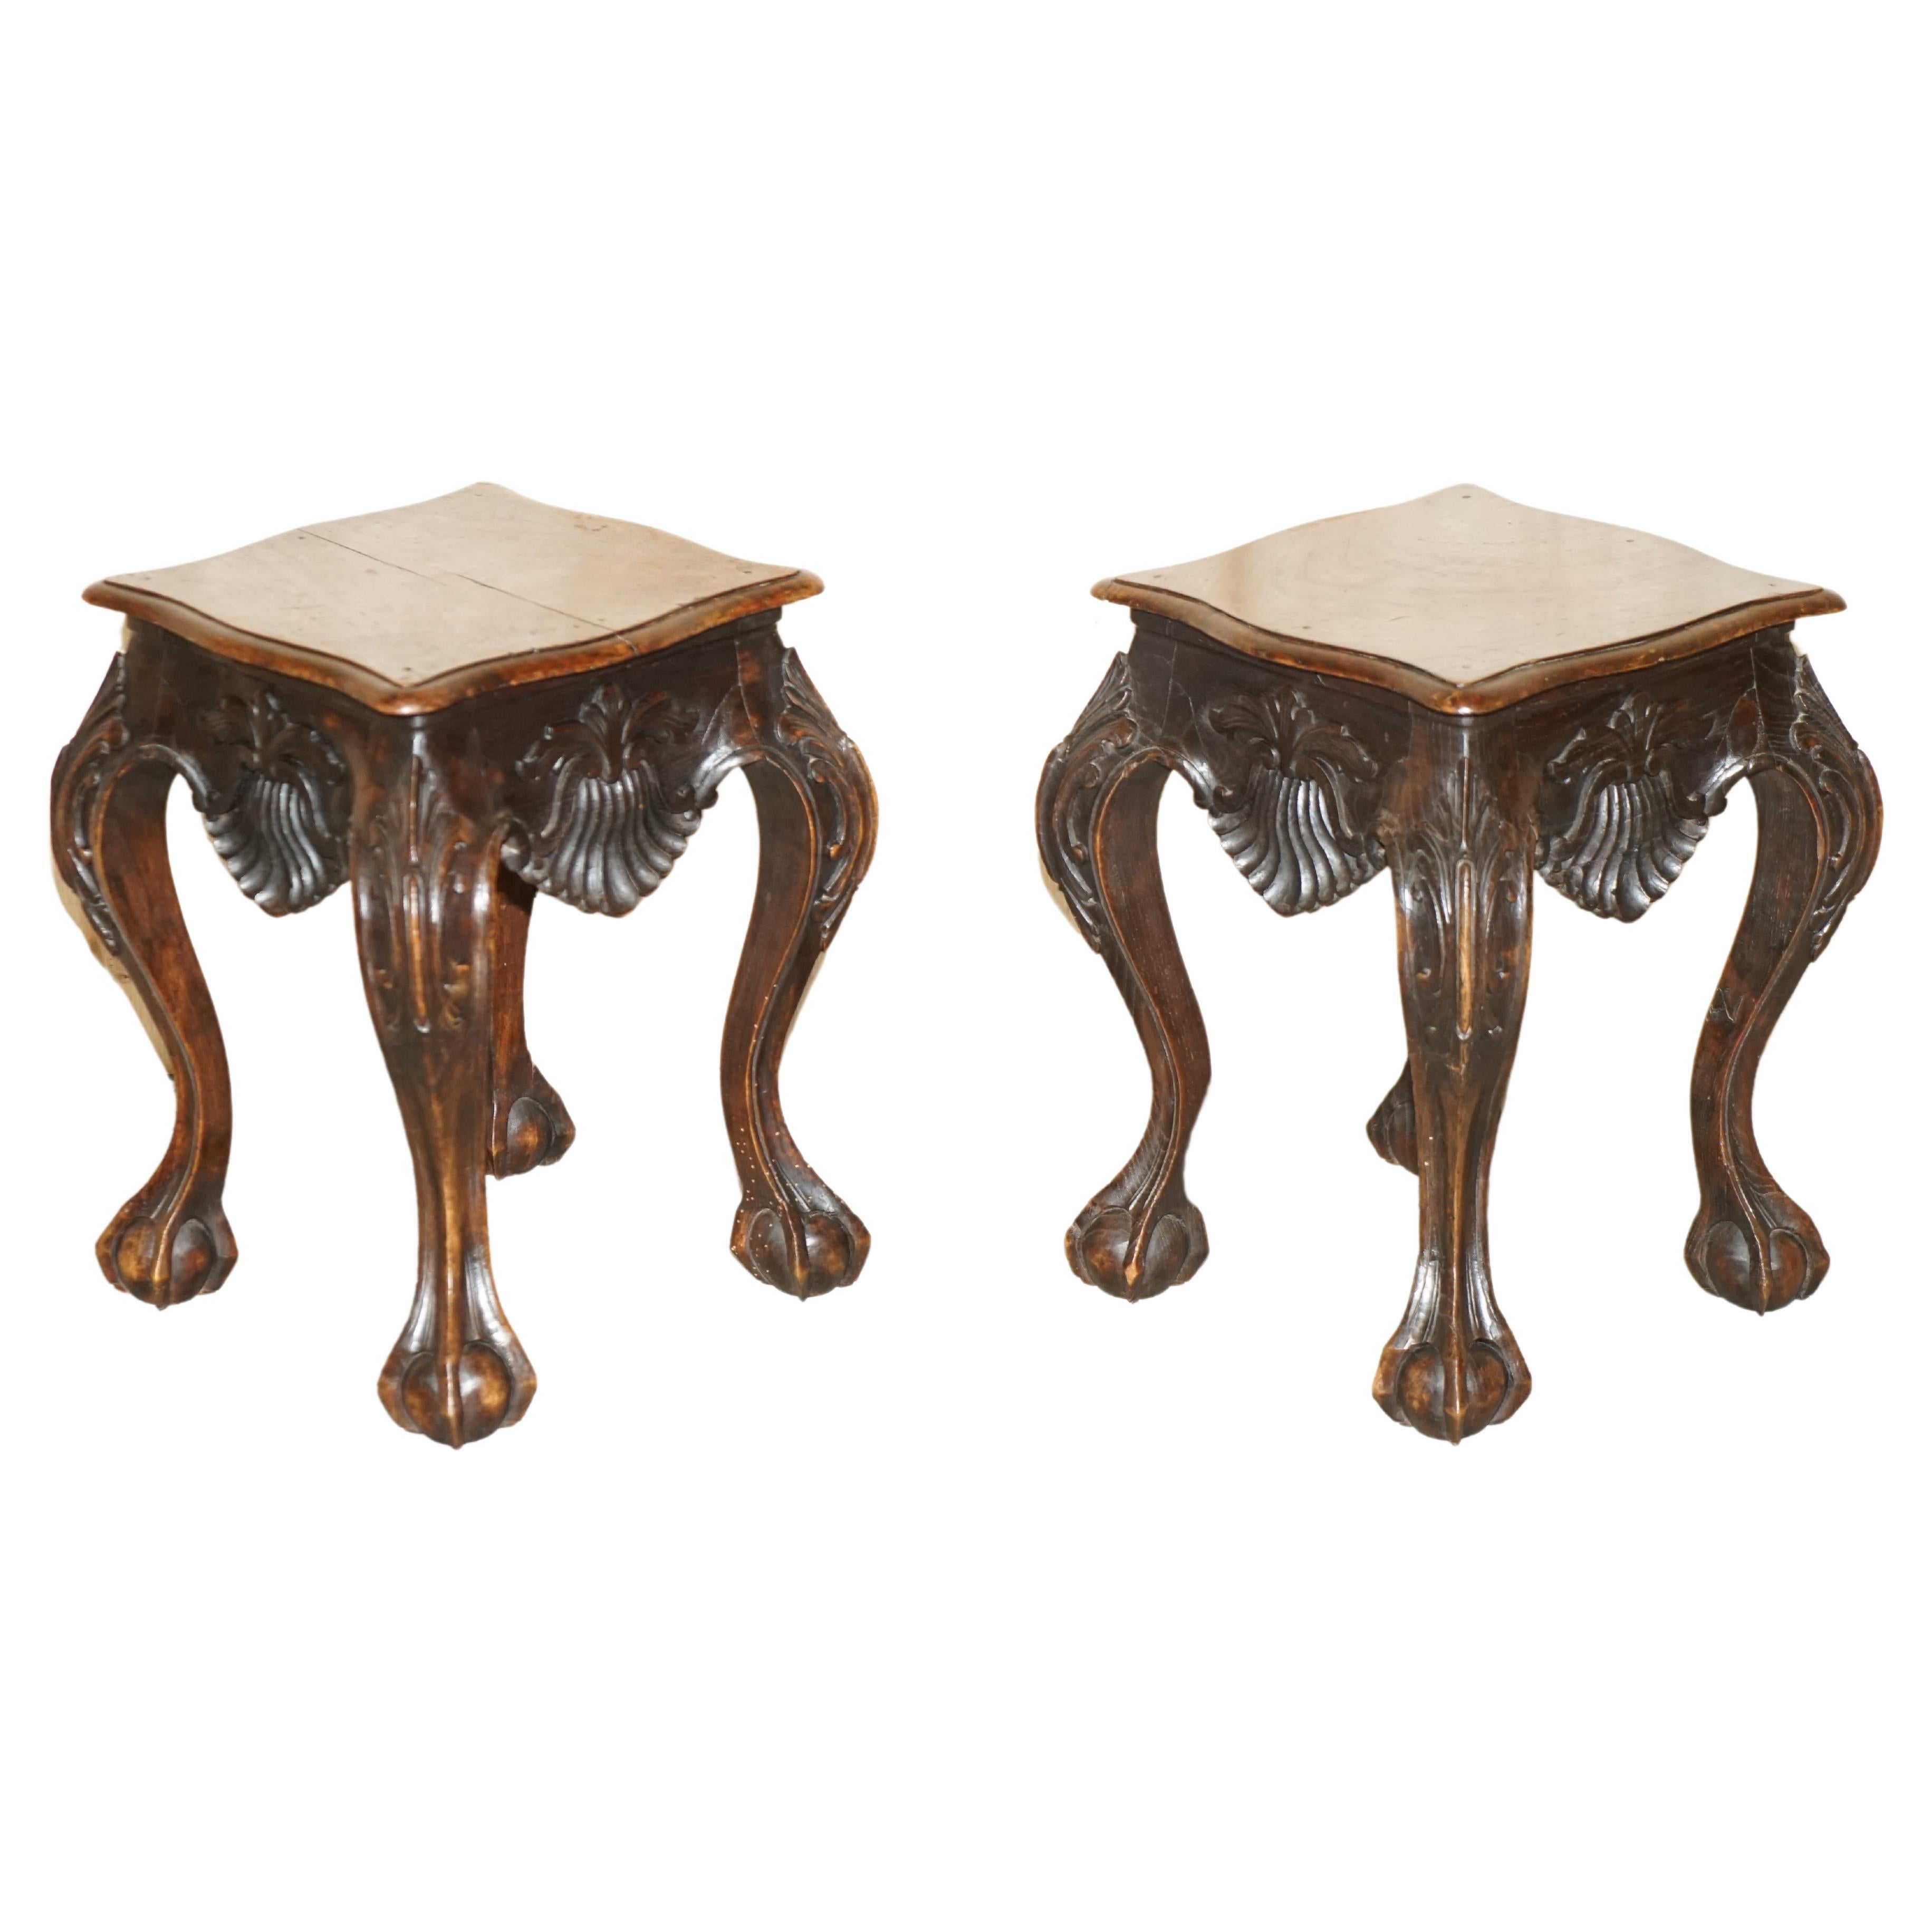 Lovely Pair of Antique circa 1900 Hand Carved Hardwood Claw & Ball Side Tables